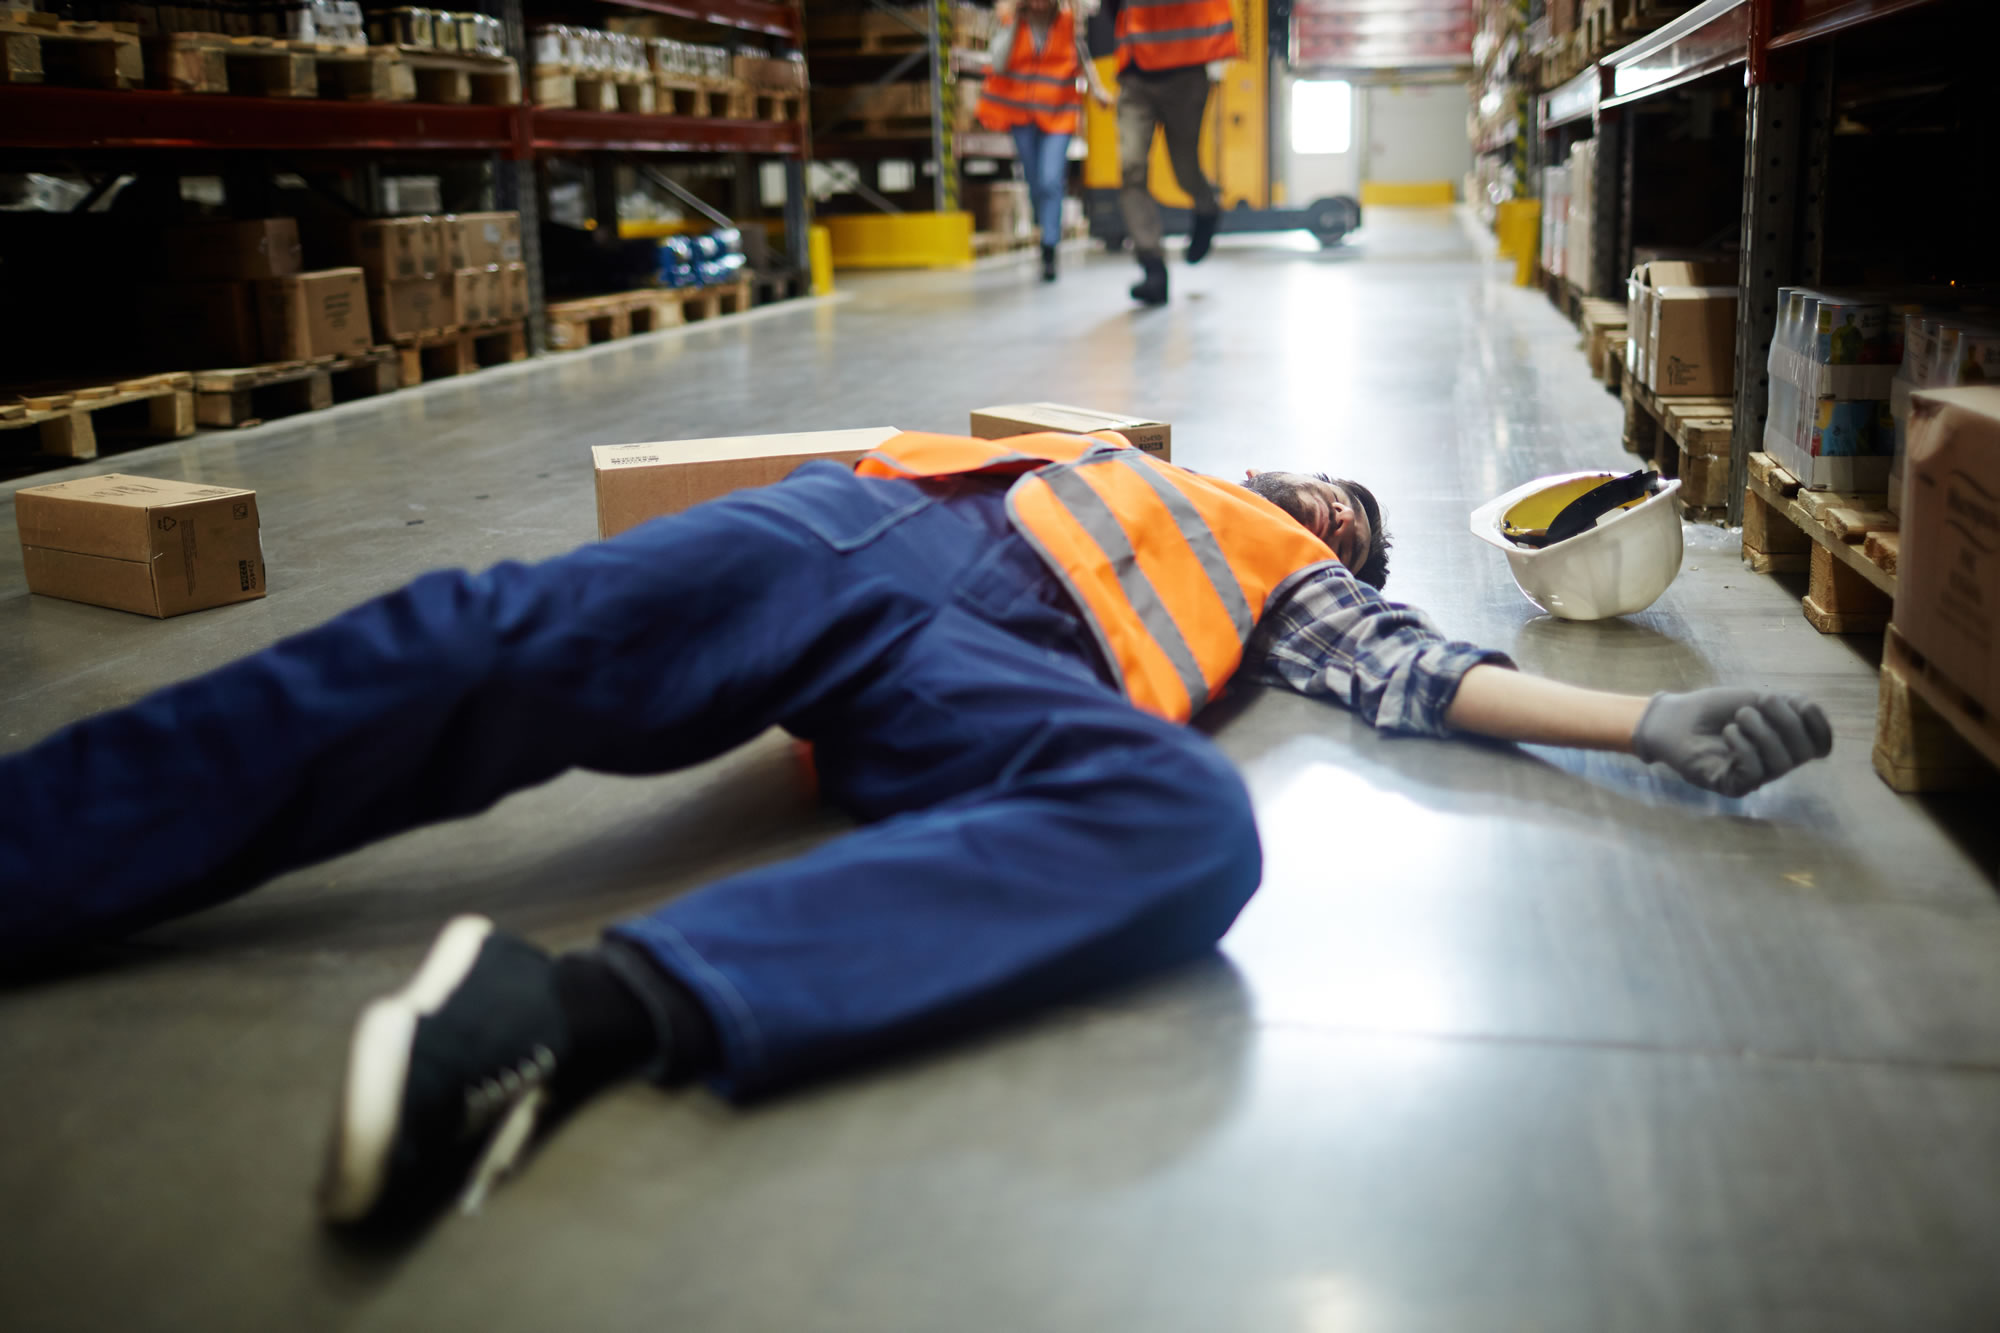 Workplace Slip, Trip or Fall - slip and trip hazards in the workplace, suing employer for negligence